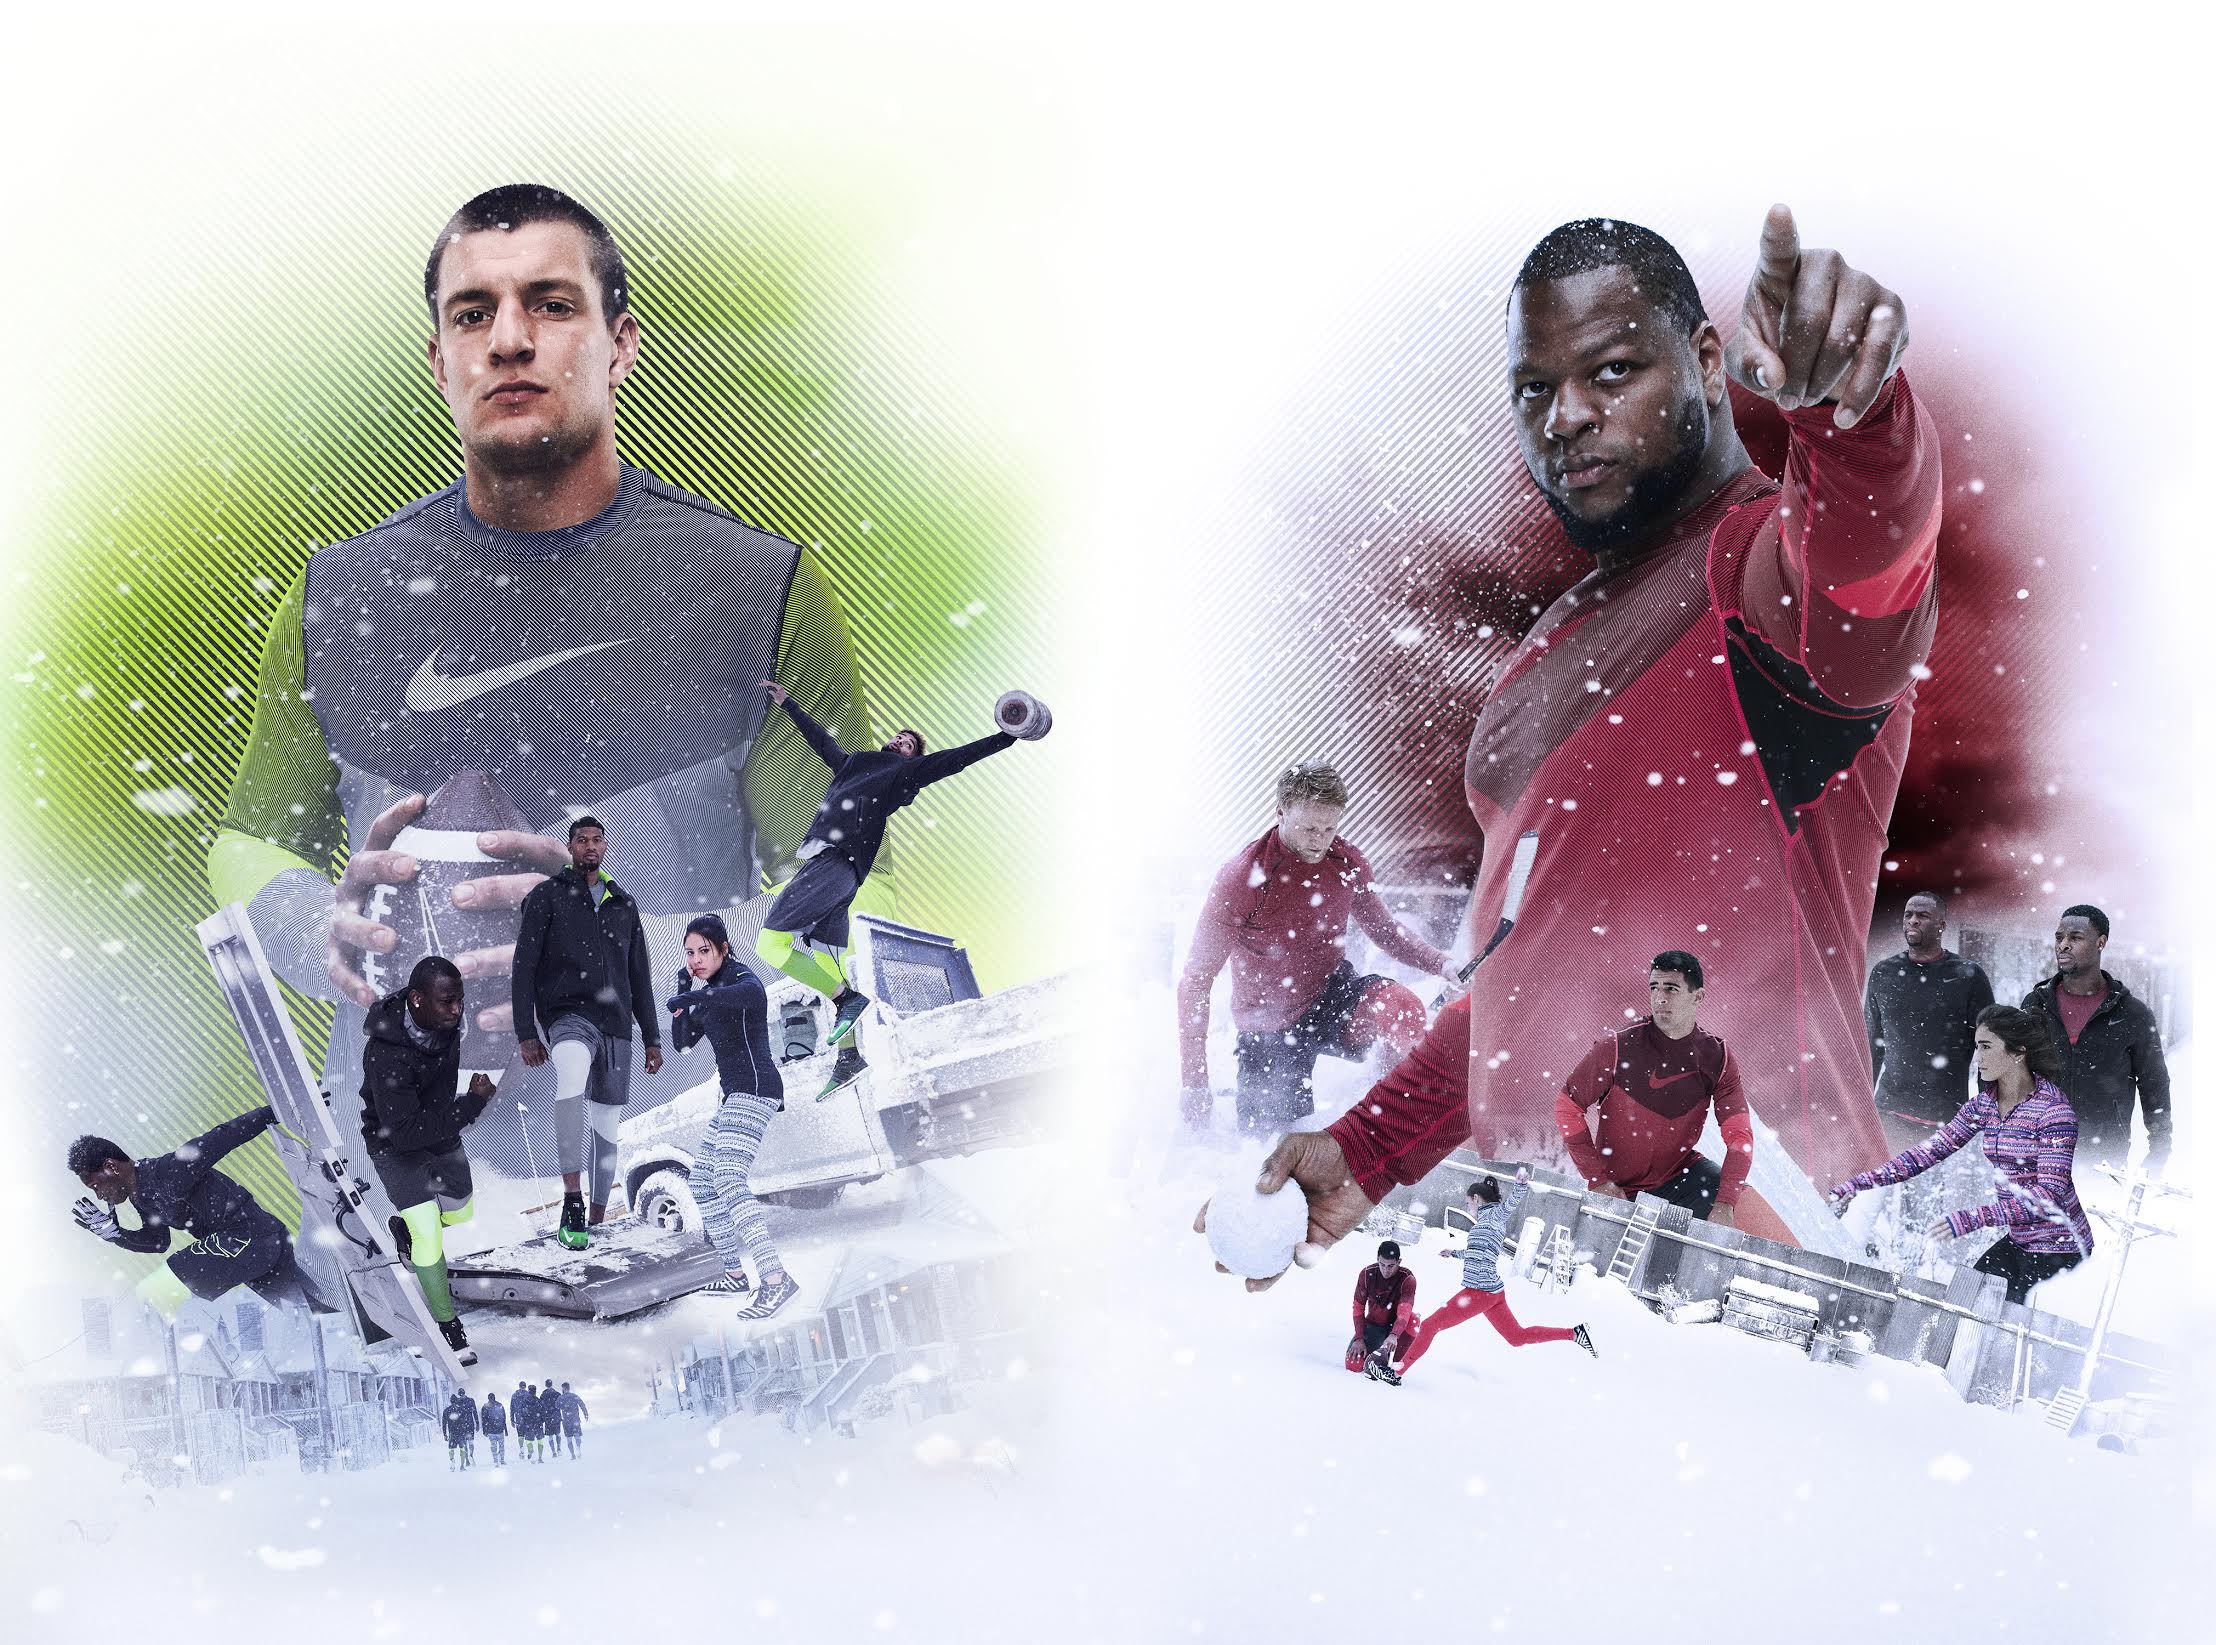 nike snow day commercial cast